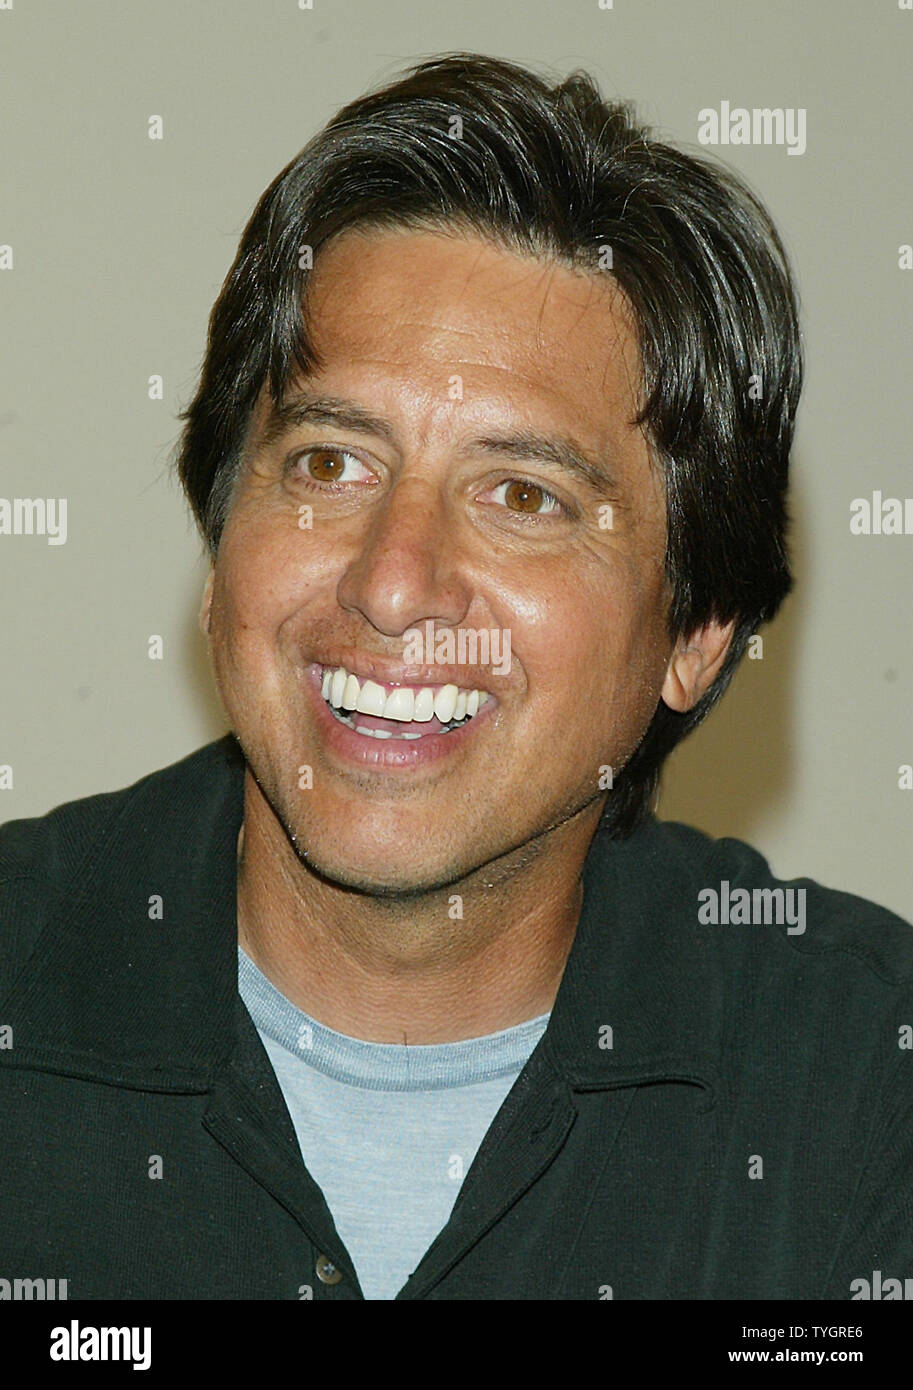 Ray Romano signs copies of his new book 'Everybody Loves Raymond: Our Family Album' at Barnes & Noble in New York on September10, 2004.  (UPI Photo/Laura Cavanaugh) Stock Photo